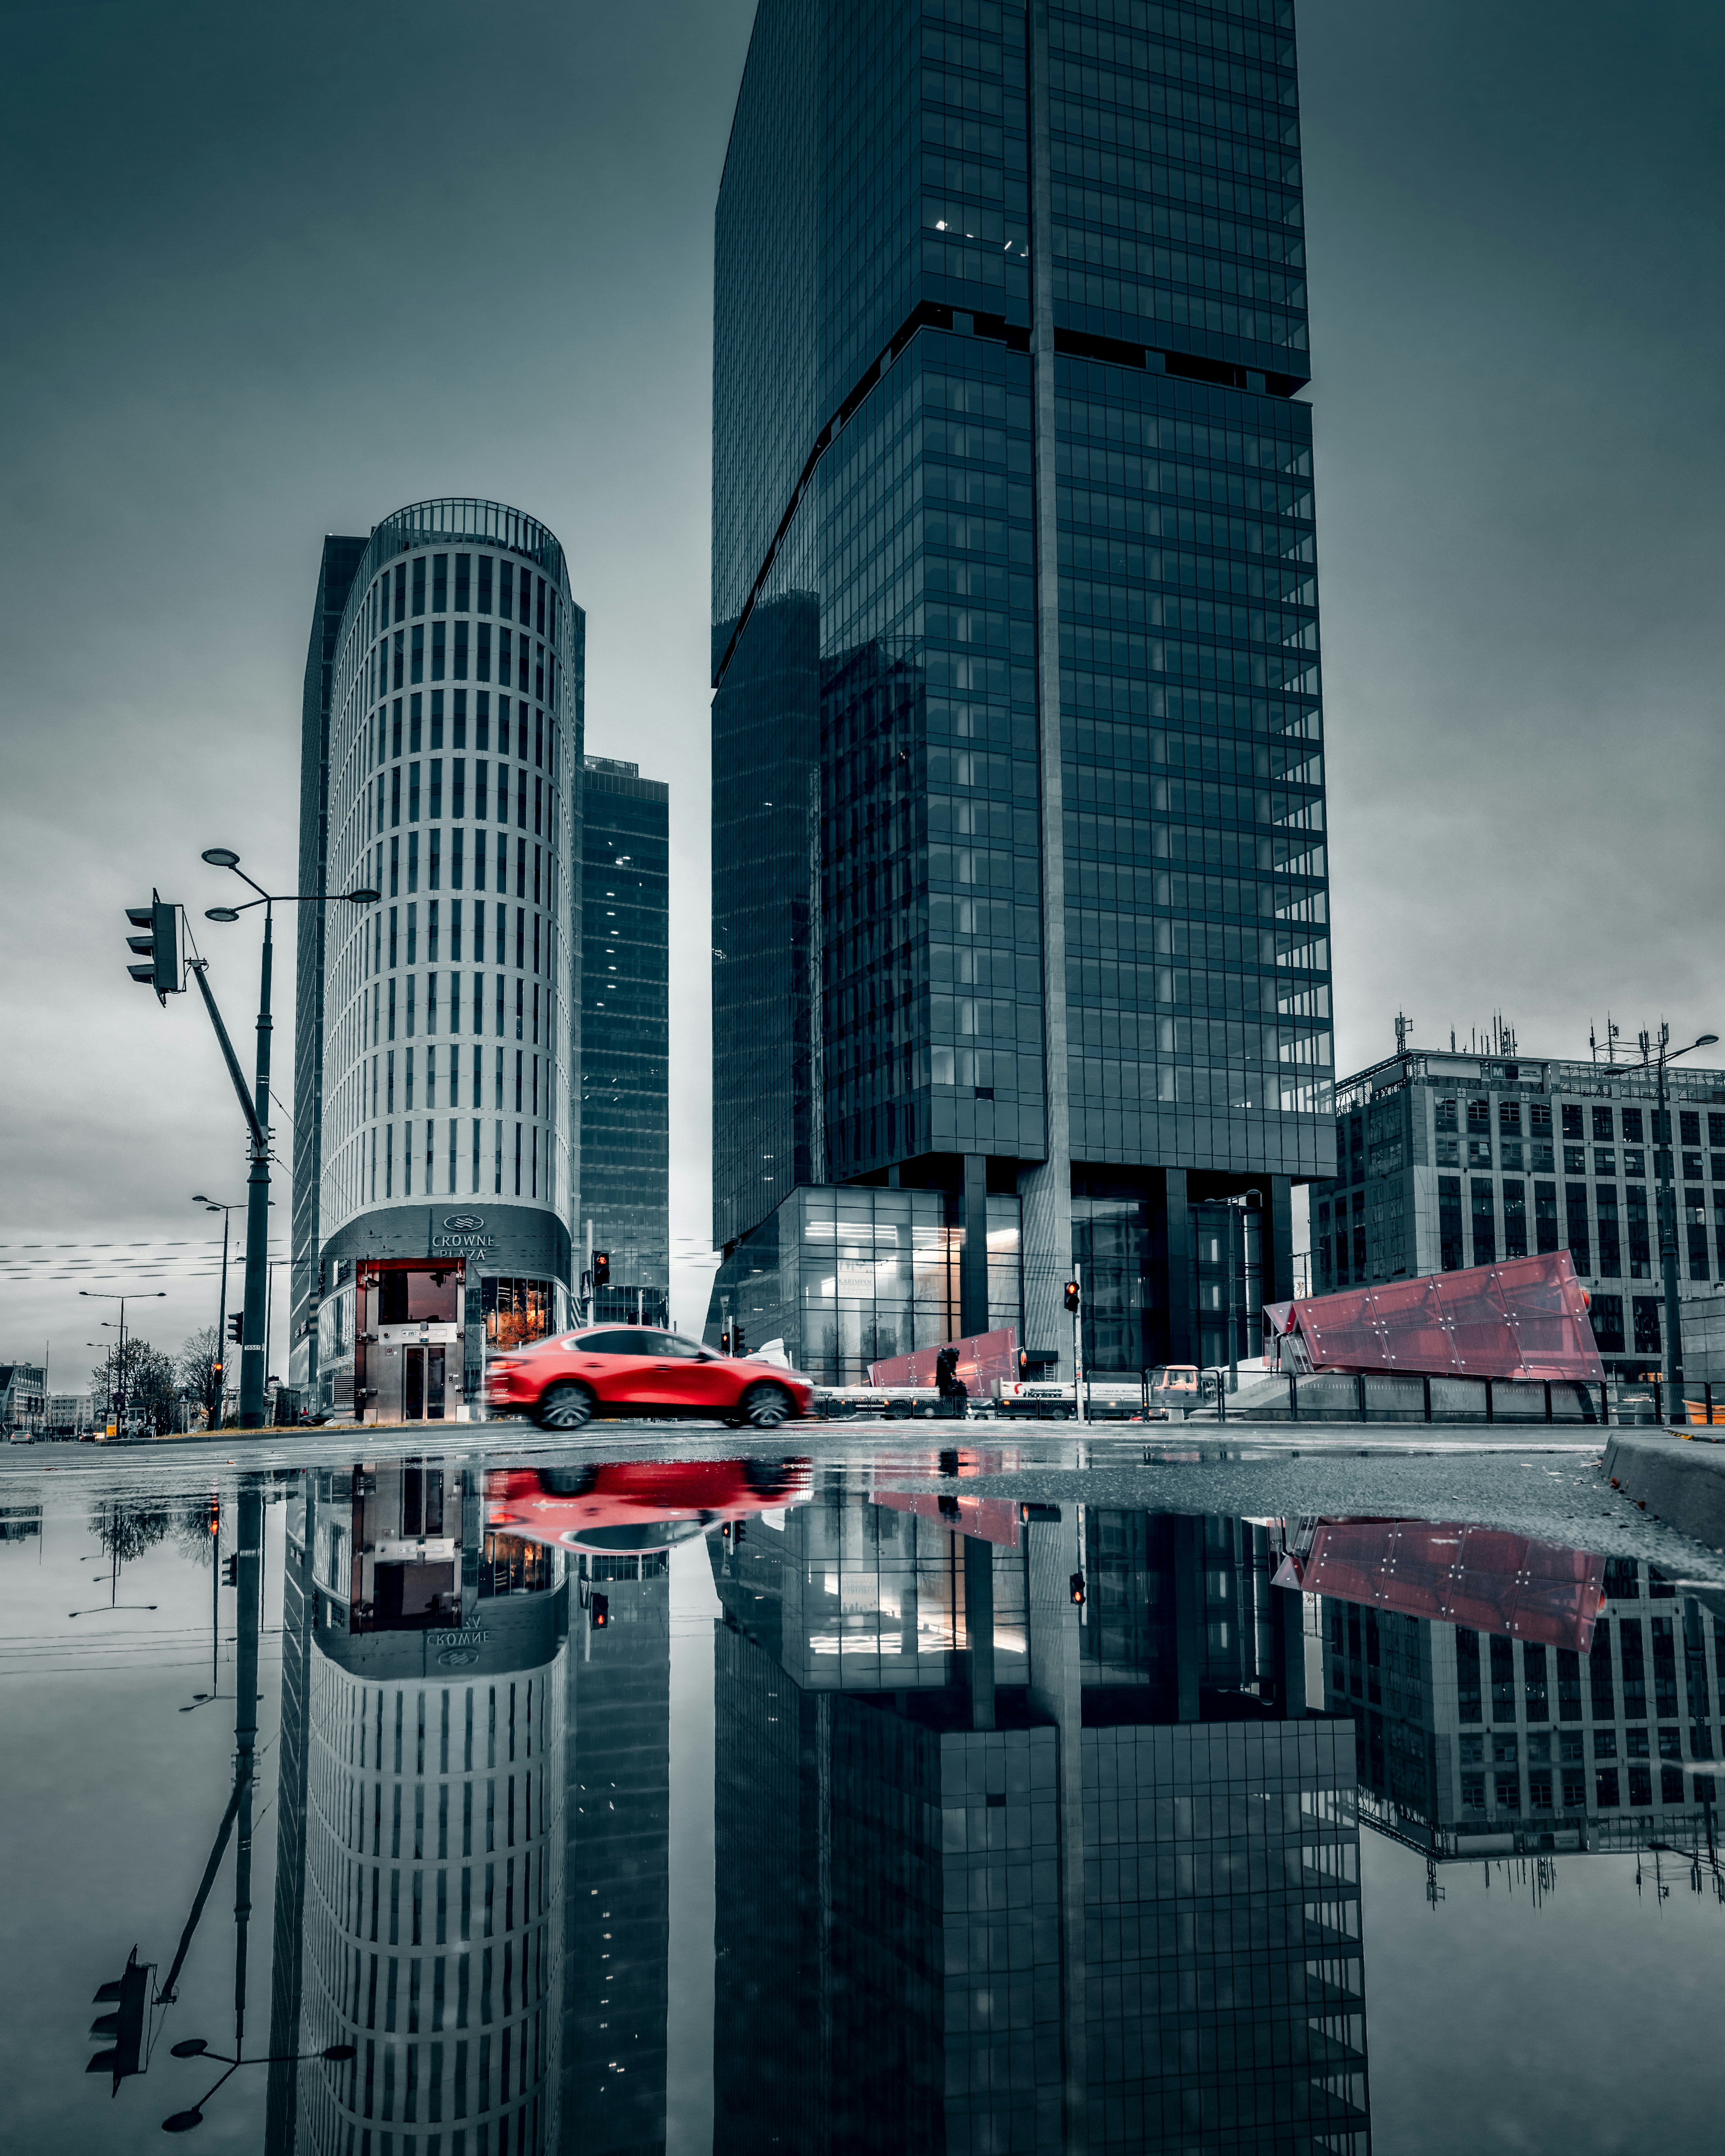 red and white boat on water near high rise buildings during daytime